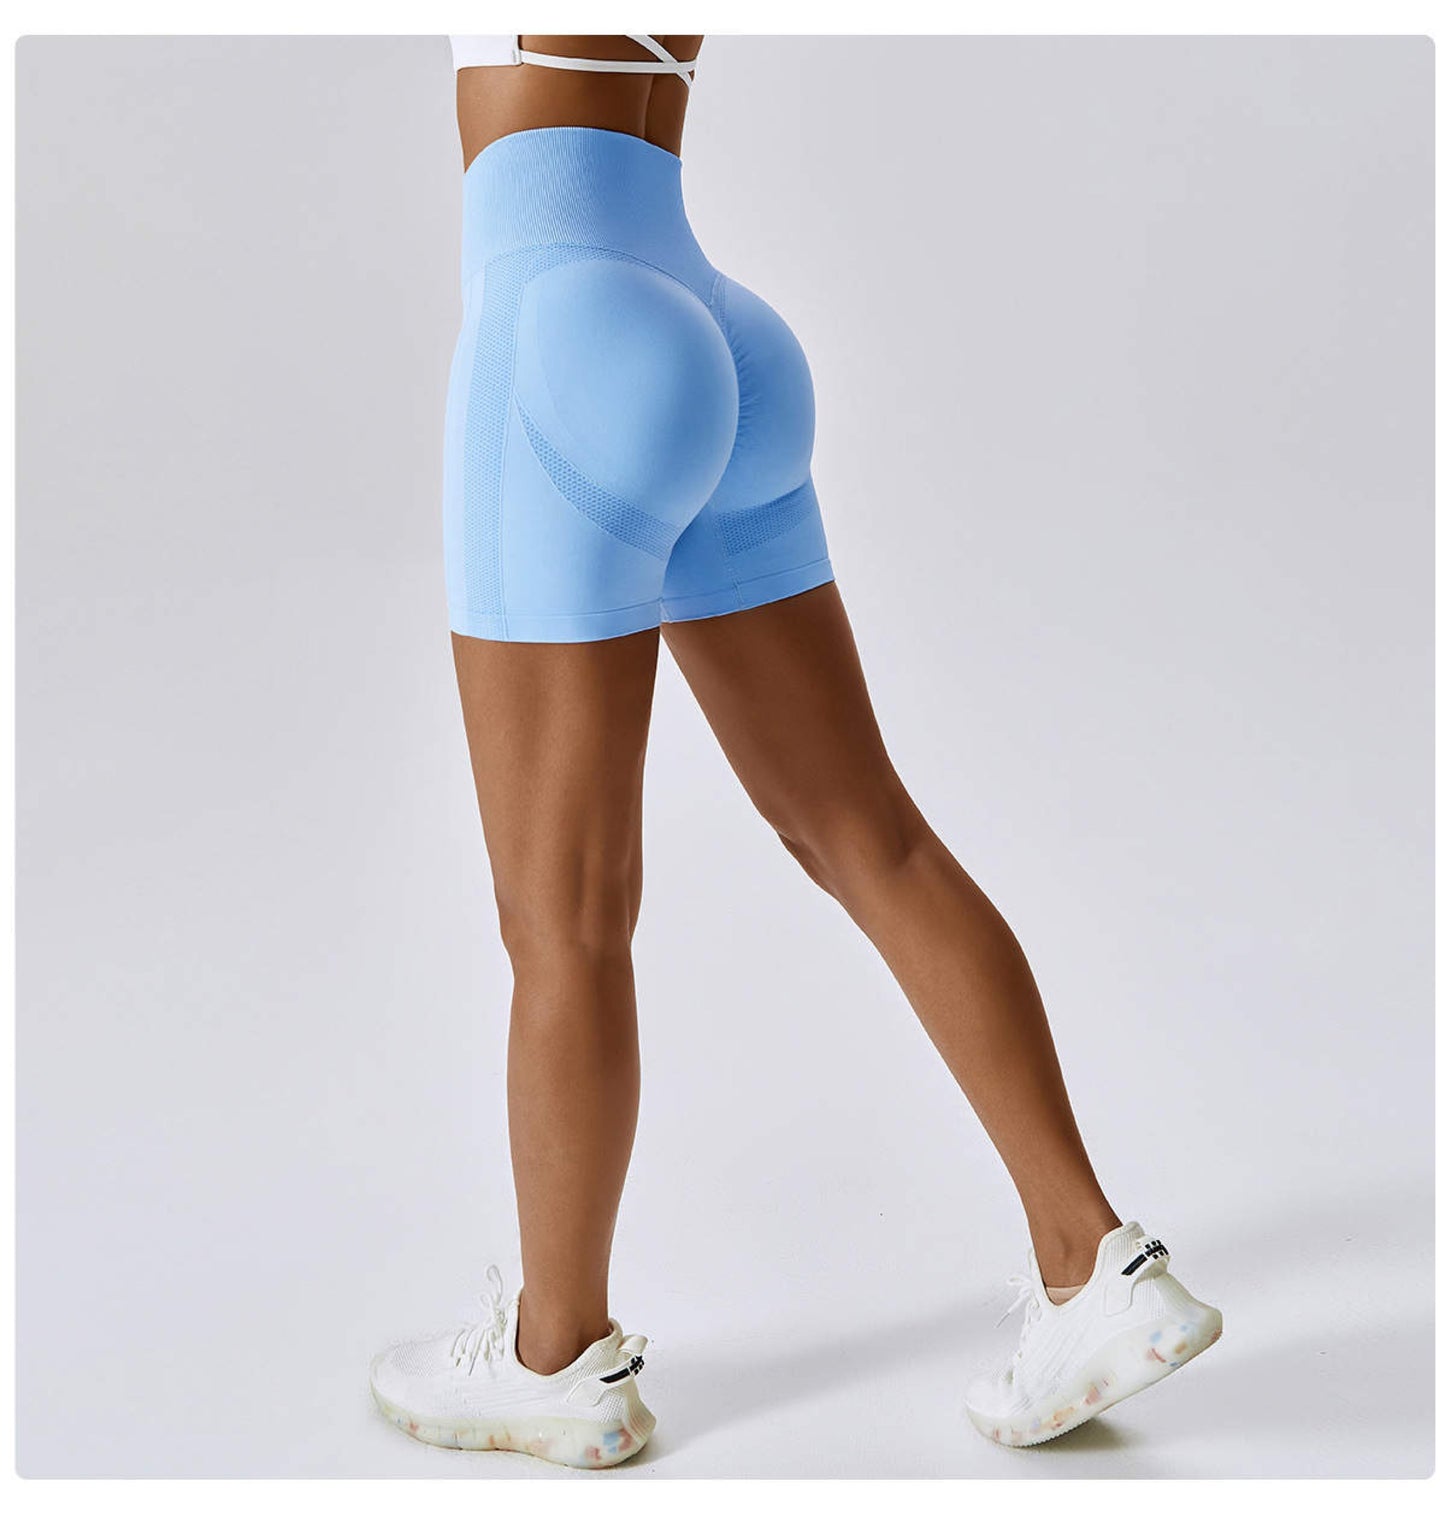 Obsessed Scrunch Butt Seamless Shorts